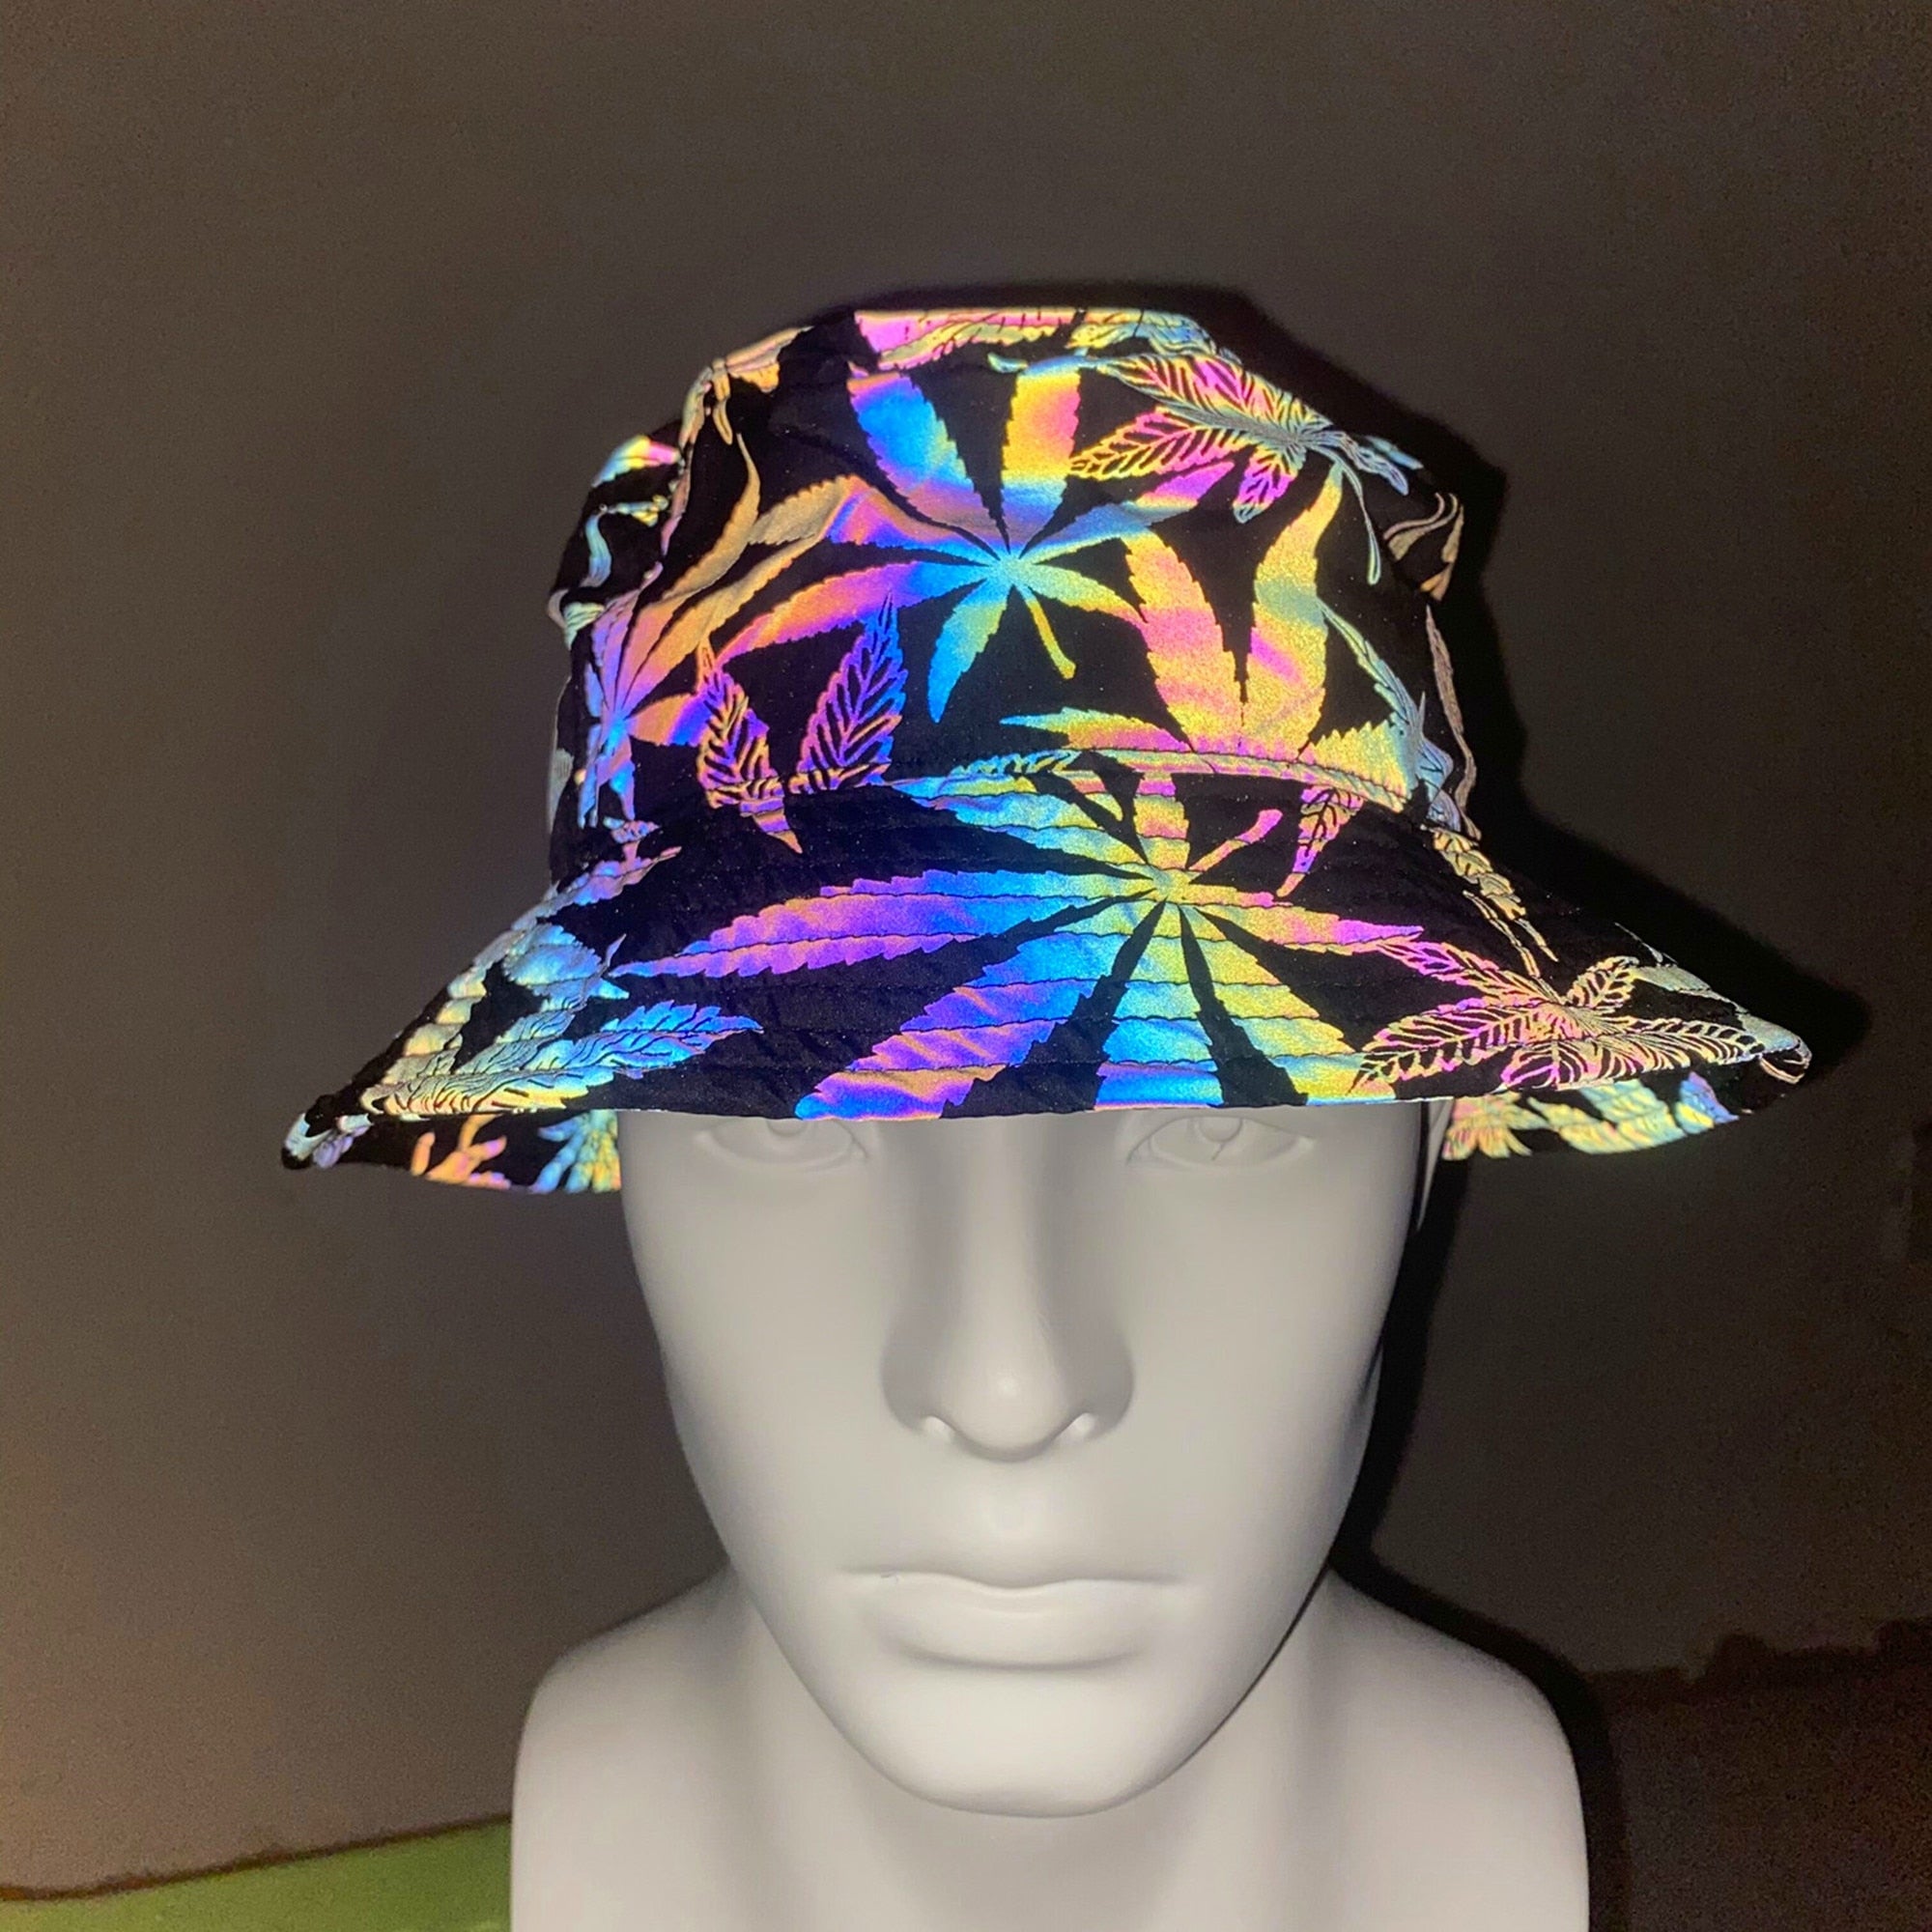 Discover a new and exciting way to express your style with hip HOLOGRAPHIC RAVE BUCKET HATS. Featuring a bold holographic design, these bucket hats are perfect for any Music Festival or Rave. Show off your unique fashion sense while staying safe, comfortable, and protected from the sun with these Trippy Rave Inspired Designs! 